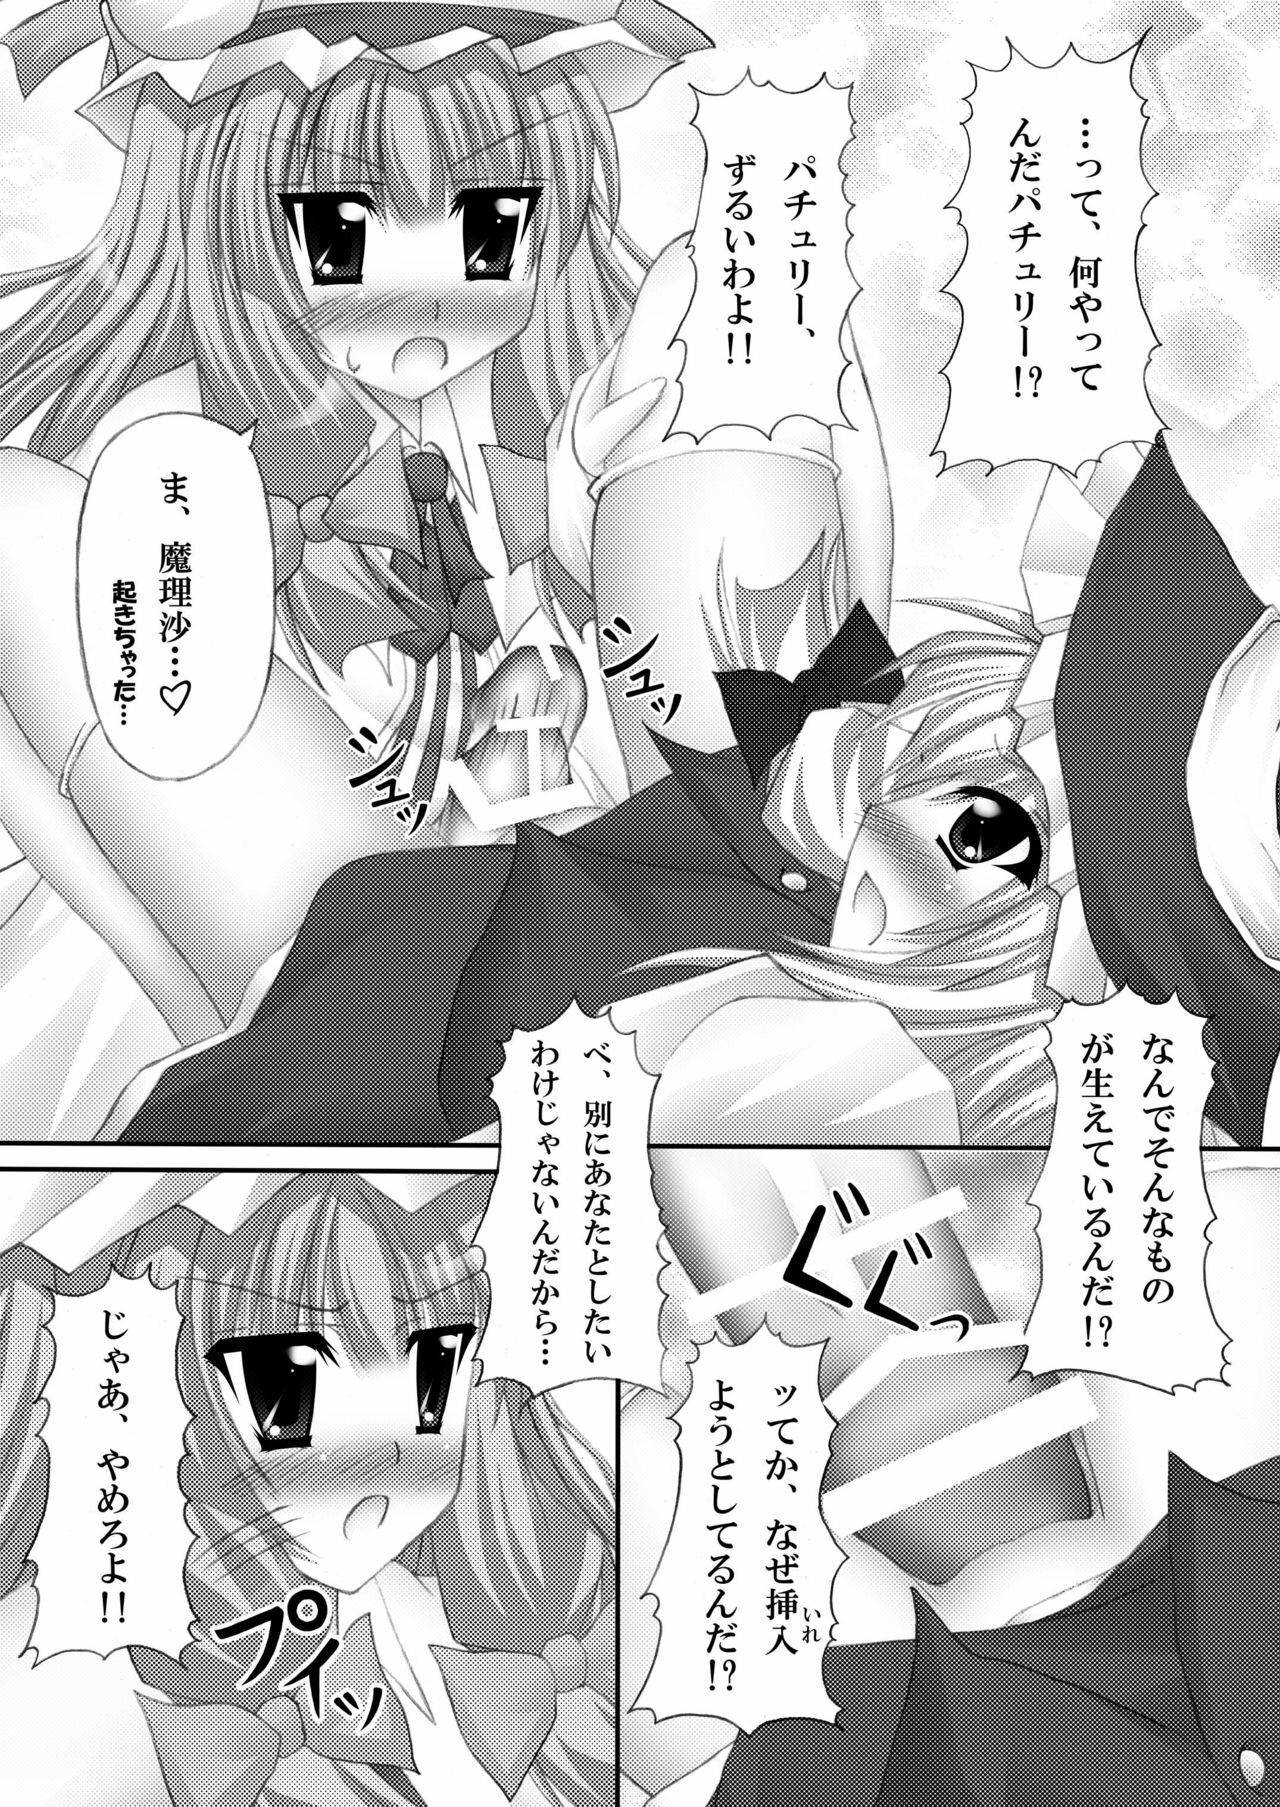 [Chronicle (YUKITO)] Only my wizard (Touhou Project) [Digital] page 11 full